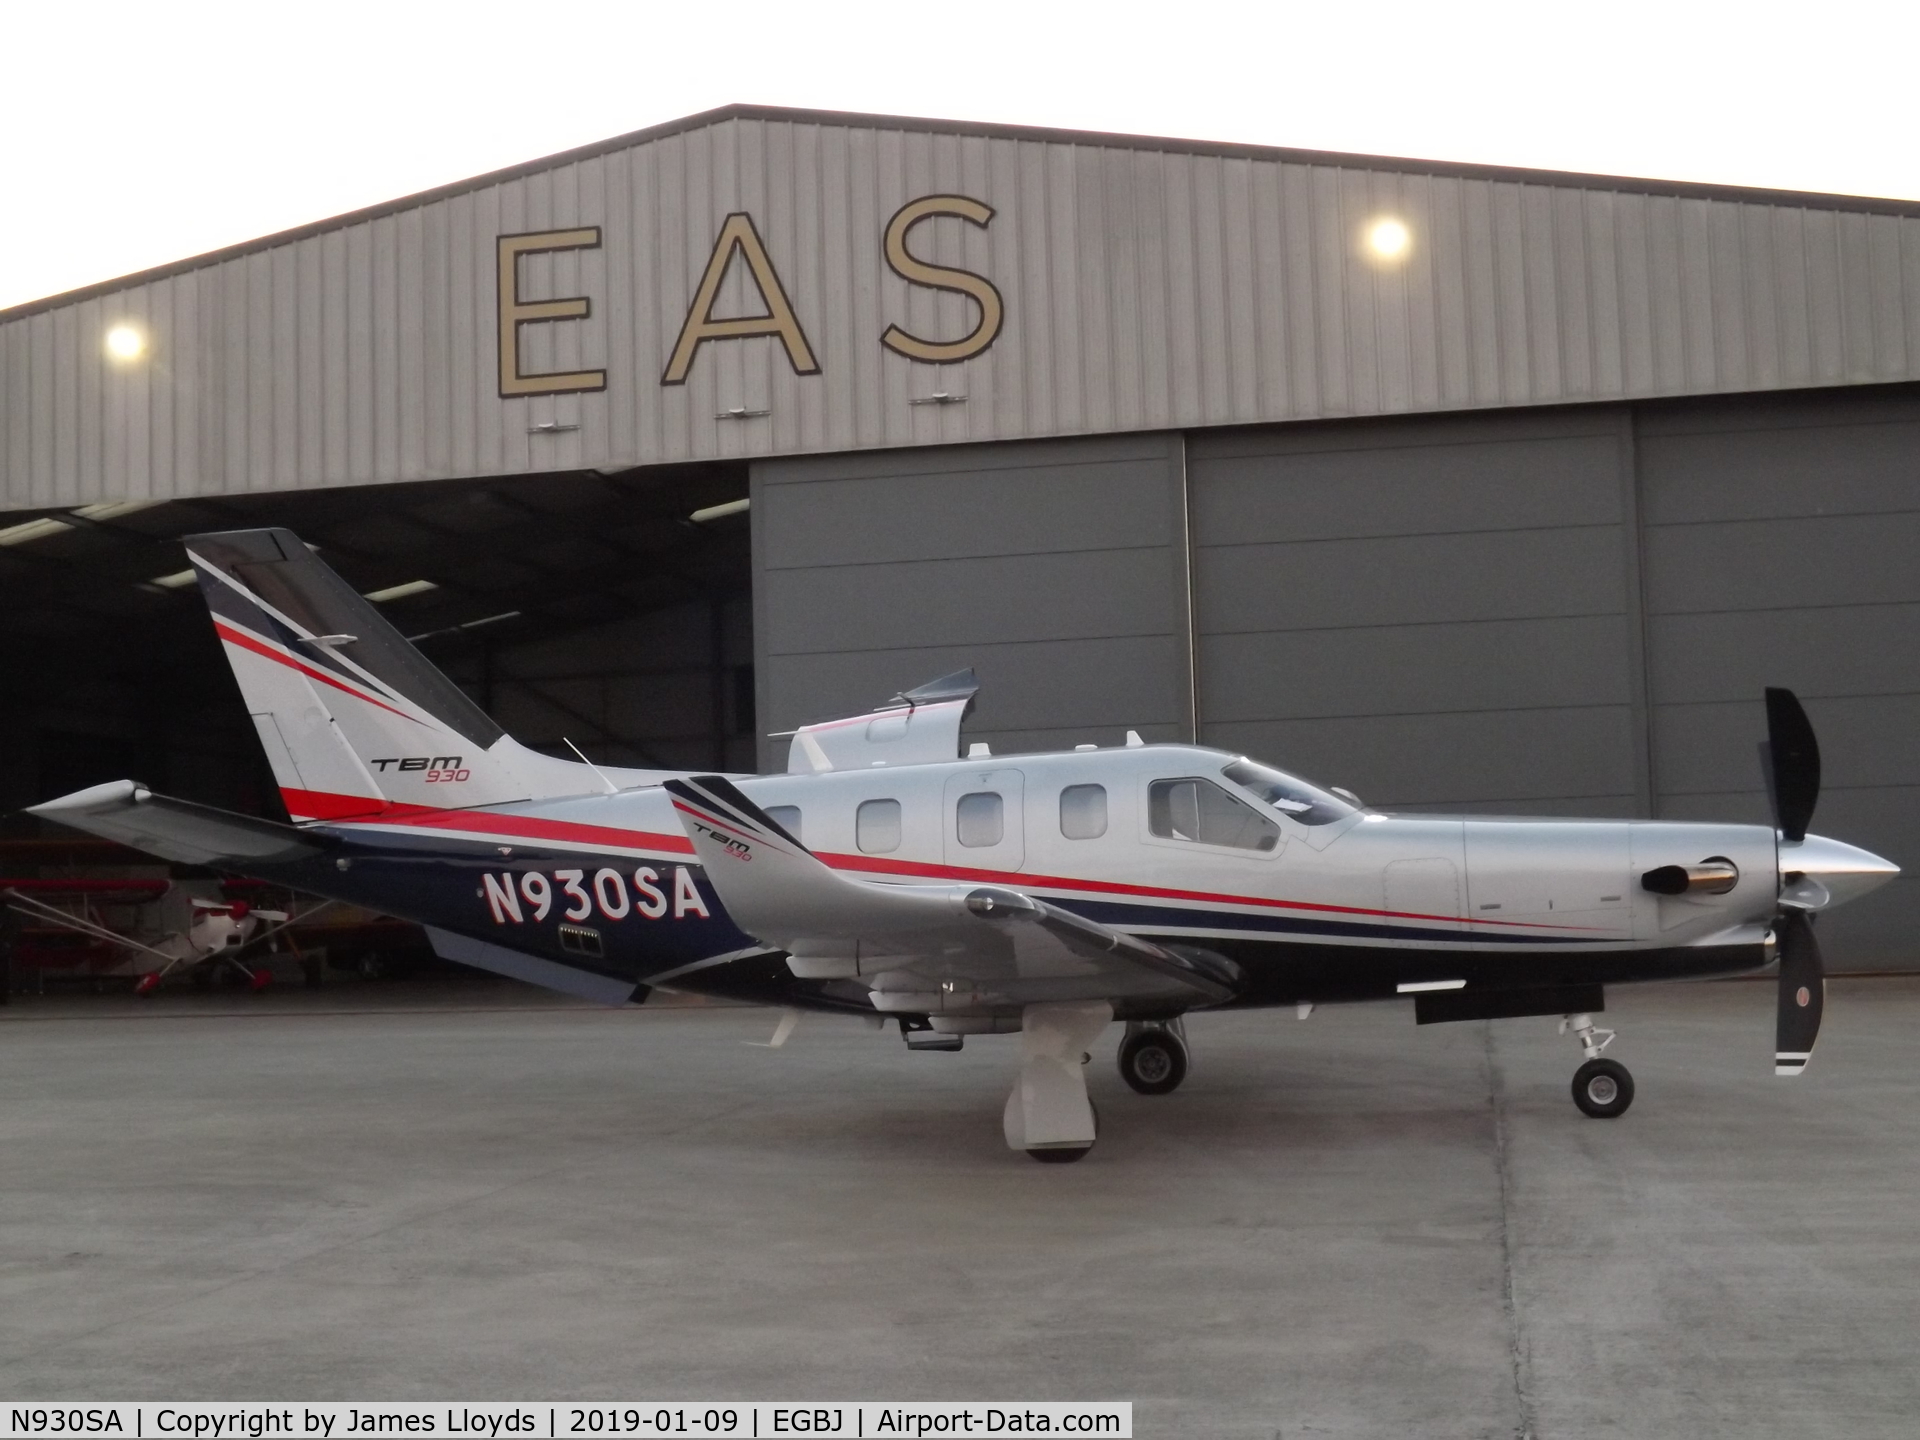 N930SA, 2018 Daher TBM-930 C/N 1241, Parked up at her home base at Gloucestershire Airport.